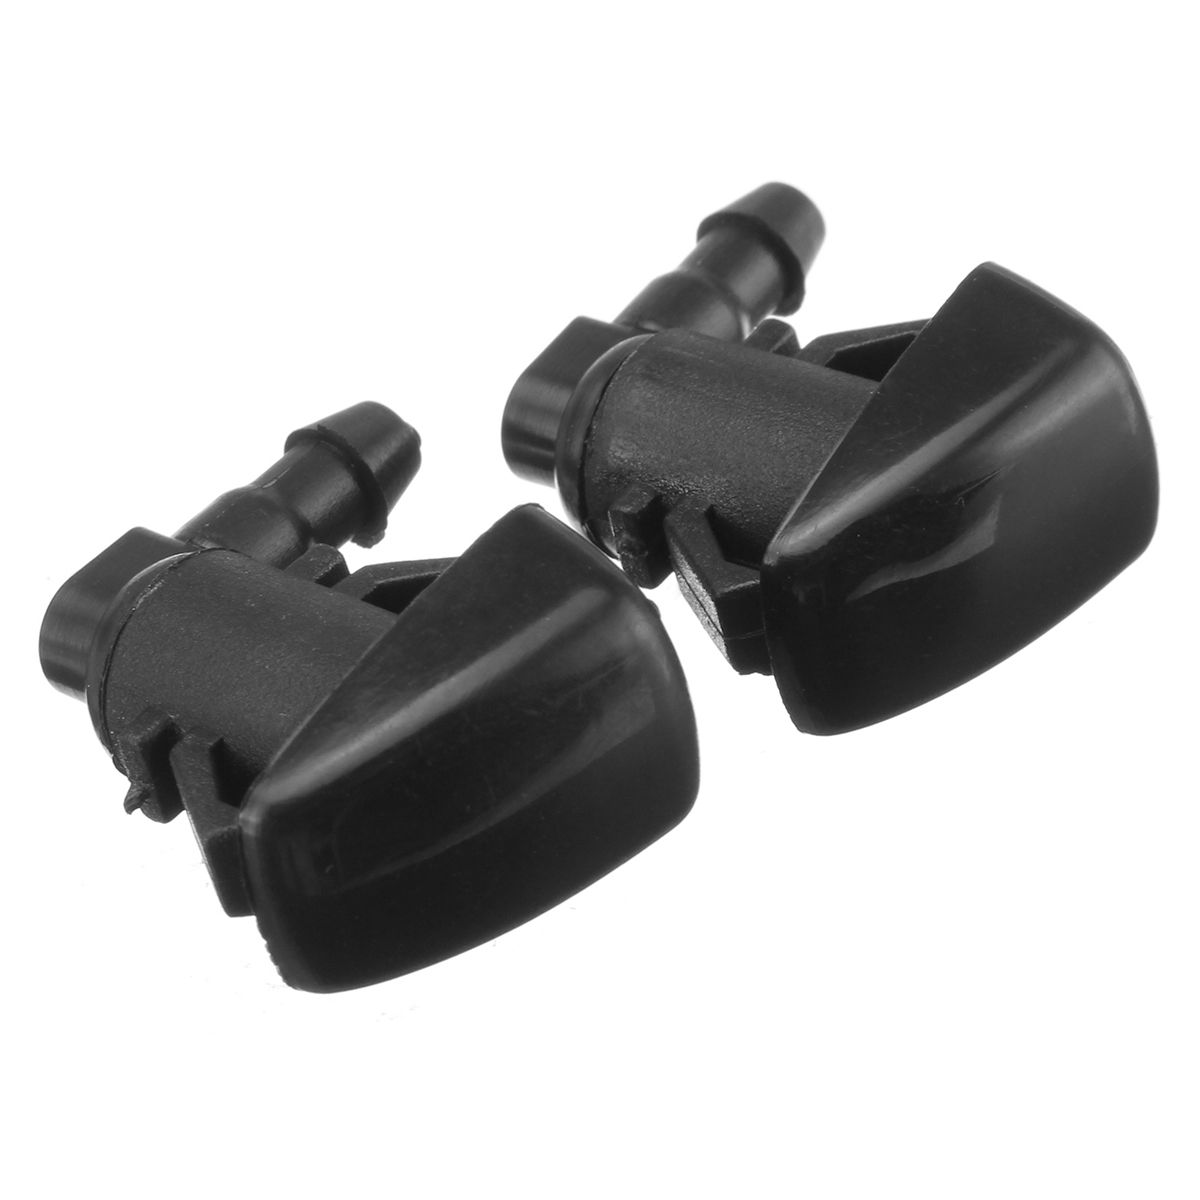 2Pc-Windshield-Wiper-Water-Spray-Jet-Nozzle-For-2007-2010-Ford-Edge-7T4Z-17603-A-1574905